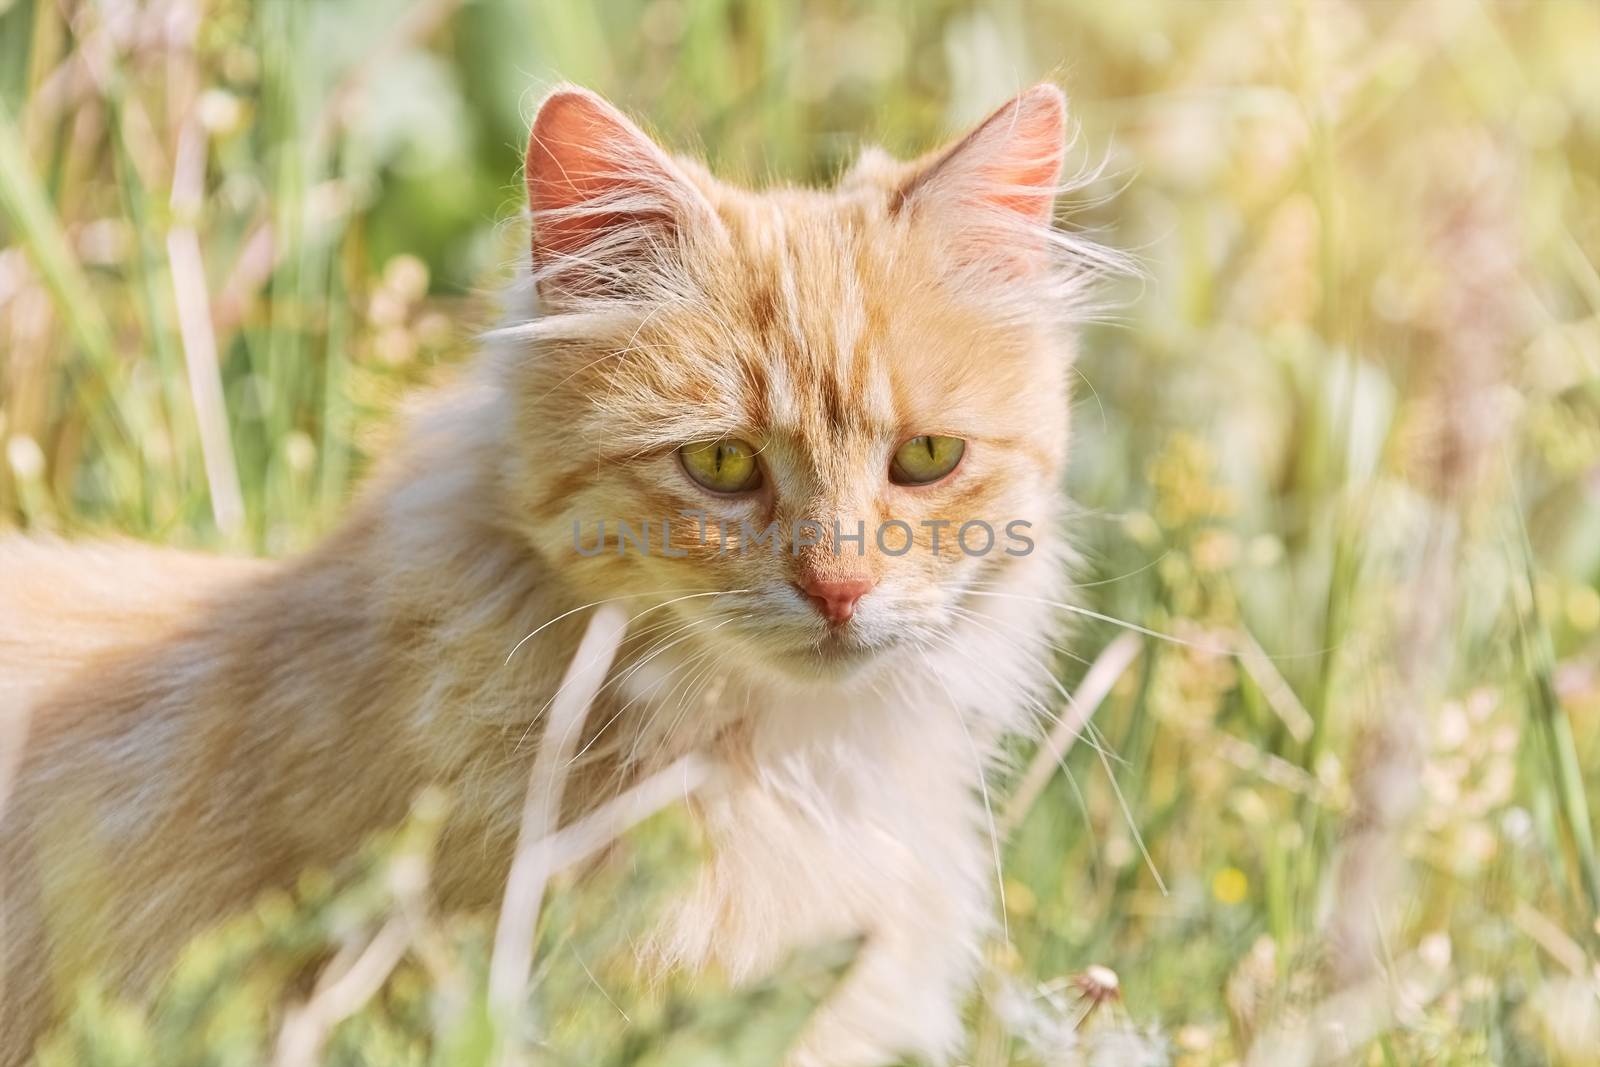 Cat in Grass by SNR